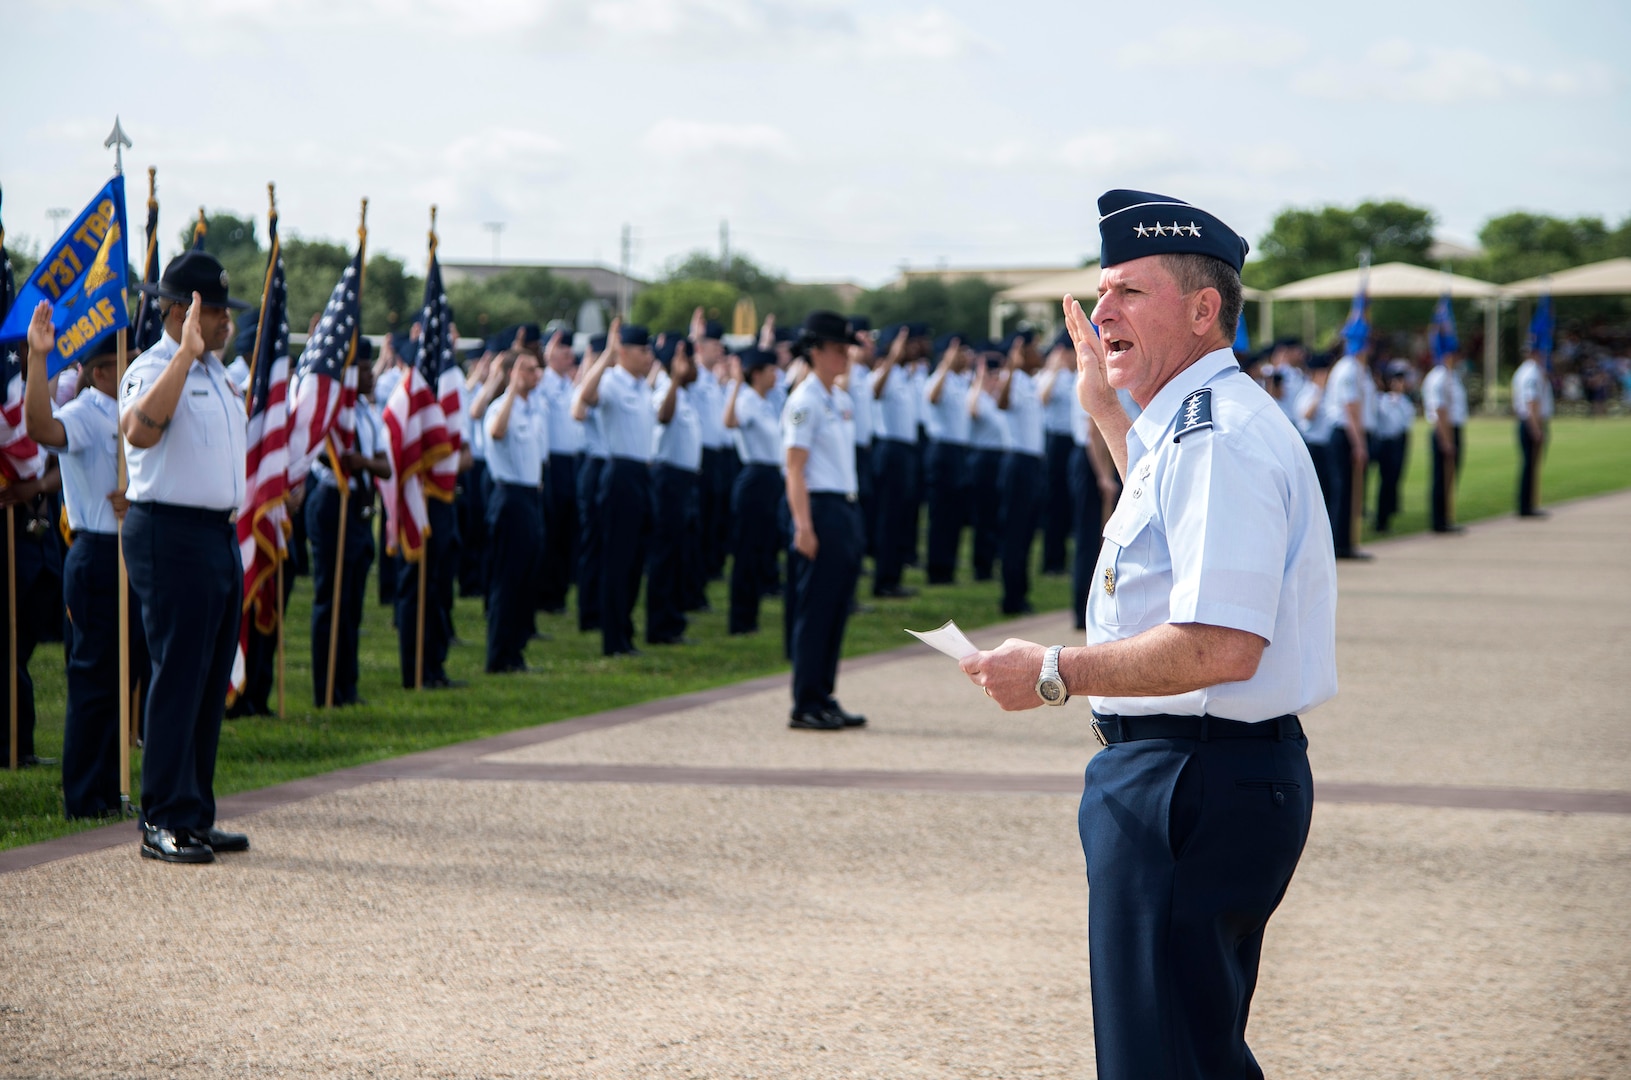 Air Force Chief of Staff Gen. David Goldfein performs the oath of enlistment to Airmen during a basic military training graduation June 16, 2017, at Joint Base San Antonio-Lackland. Goldfein toured various JBSA-Lackland facilities and met many 37th Training Wing Airmen during his two-day visit. Every enlisted Airmen begins their Air Force career at basic military training. JBSA-Lackland is often referred to as the "Gateway to the Air Force," graduating about 39,000 Airmen annually. BMT is one of the missions of the 37th Training Wing, the largest training wing in the United States Air Force. (U.S. Air Force photo by Johnny Saldivar)